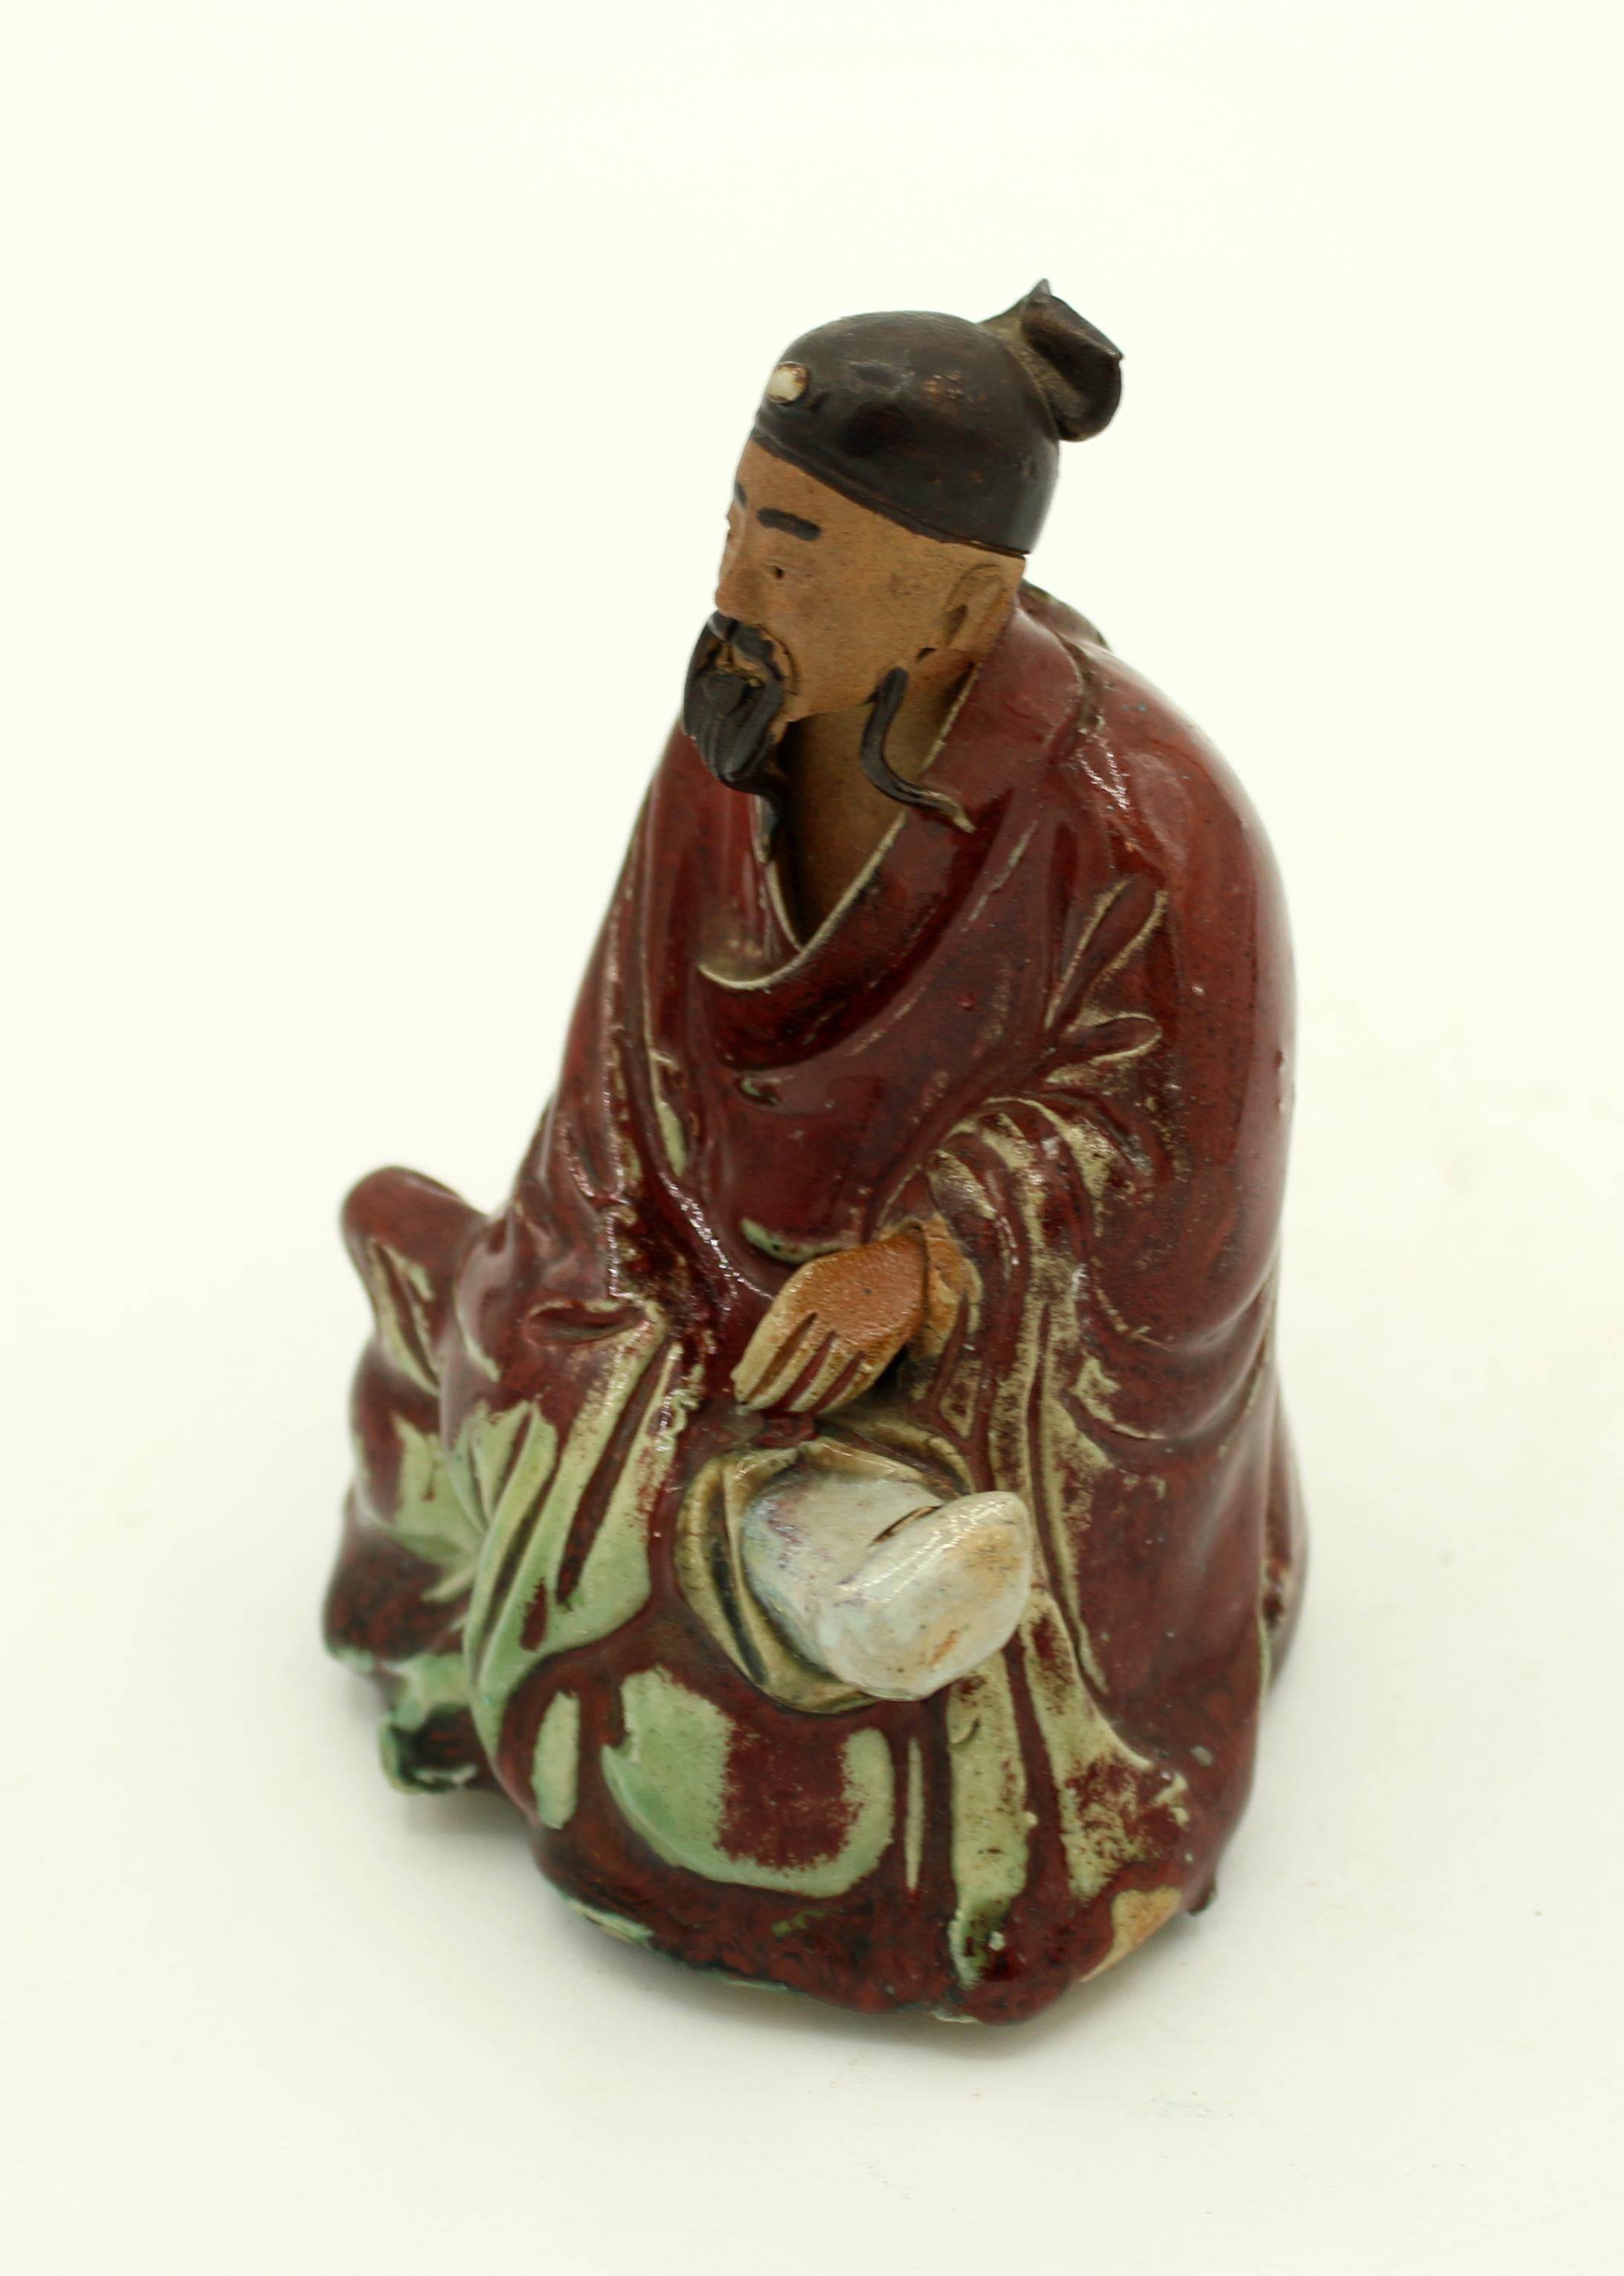 Circa 1920-30s Shiwan pottery seated figure. Finely modeled; rich colored enamel glazing. Comparable to several examples in the British Museum collections. Exceptional work. Measures: 4 5/8